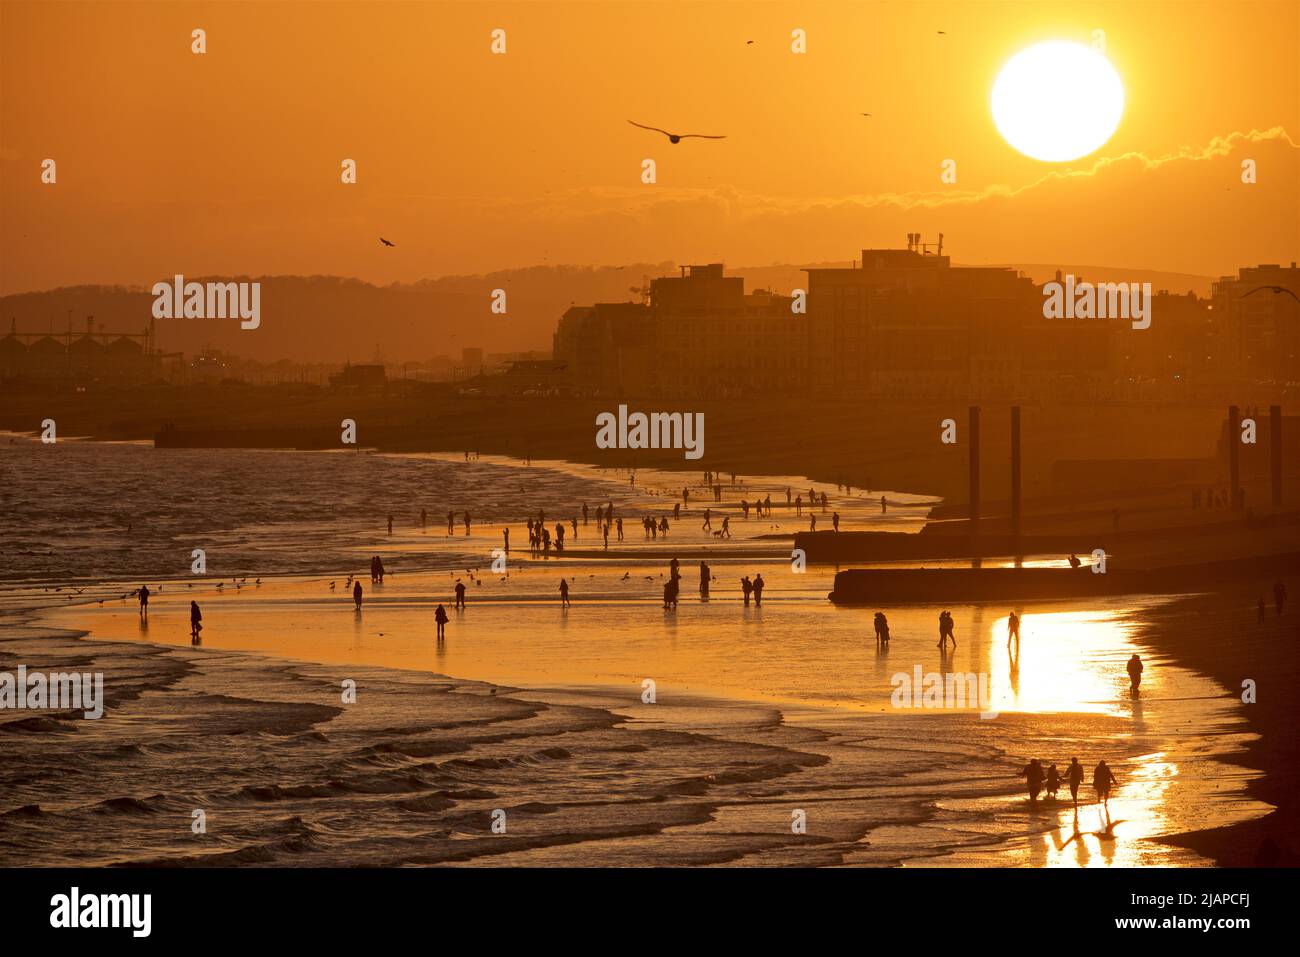 Silhouetted shapes of people on the beach at low tide, Brighton & Hove, East Sussex, England, UK. The sun setting. Vertical cast iron pillars of the old West Pier on the right. Stock Photo